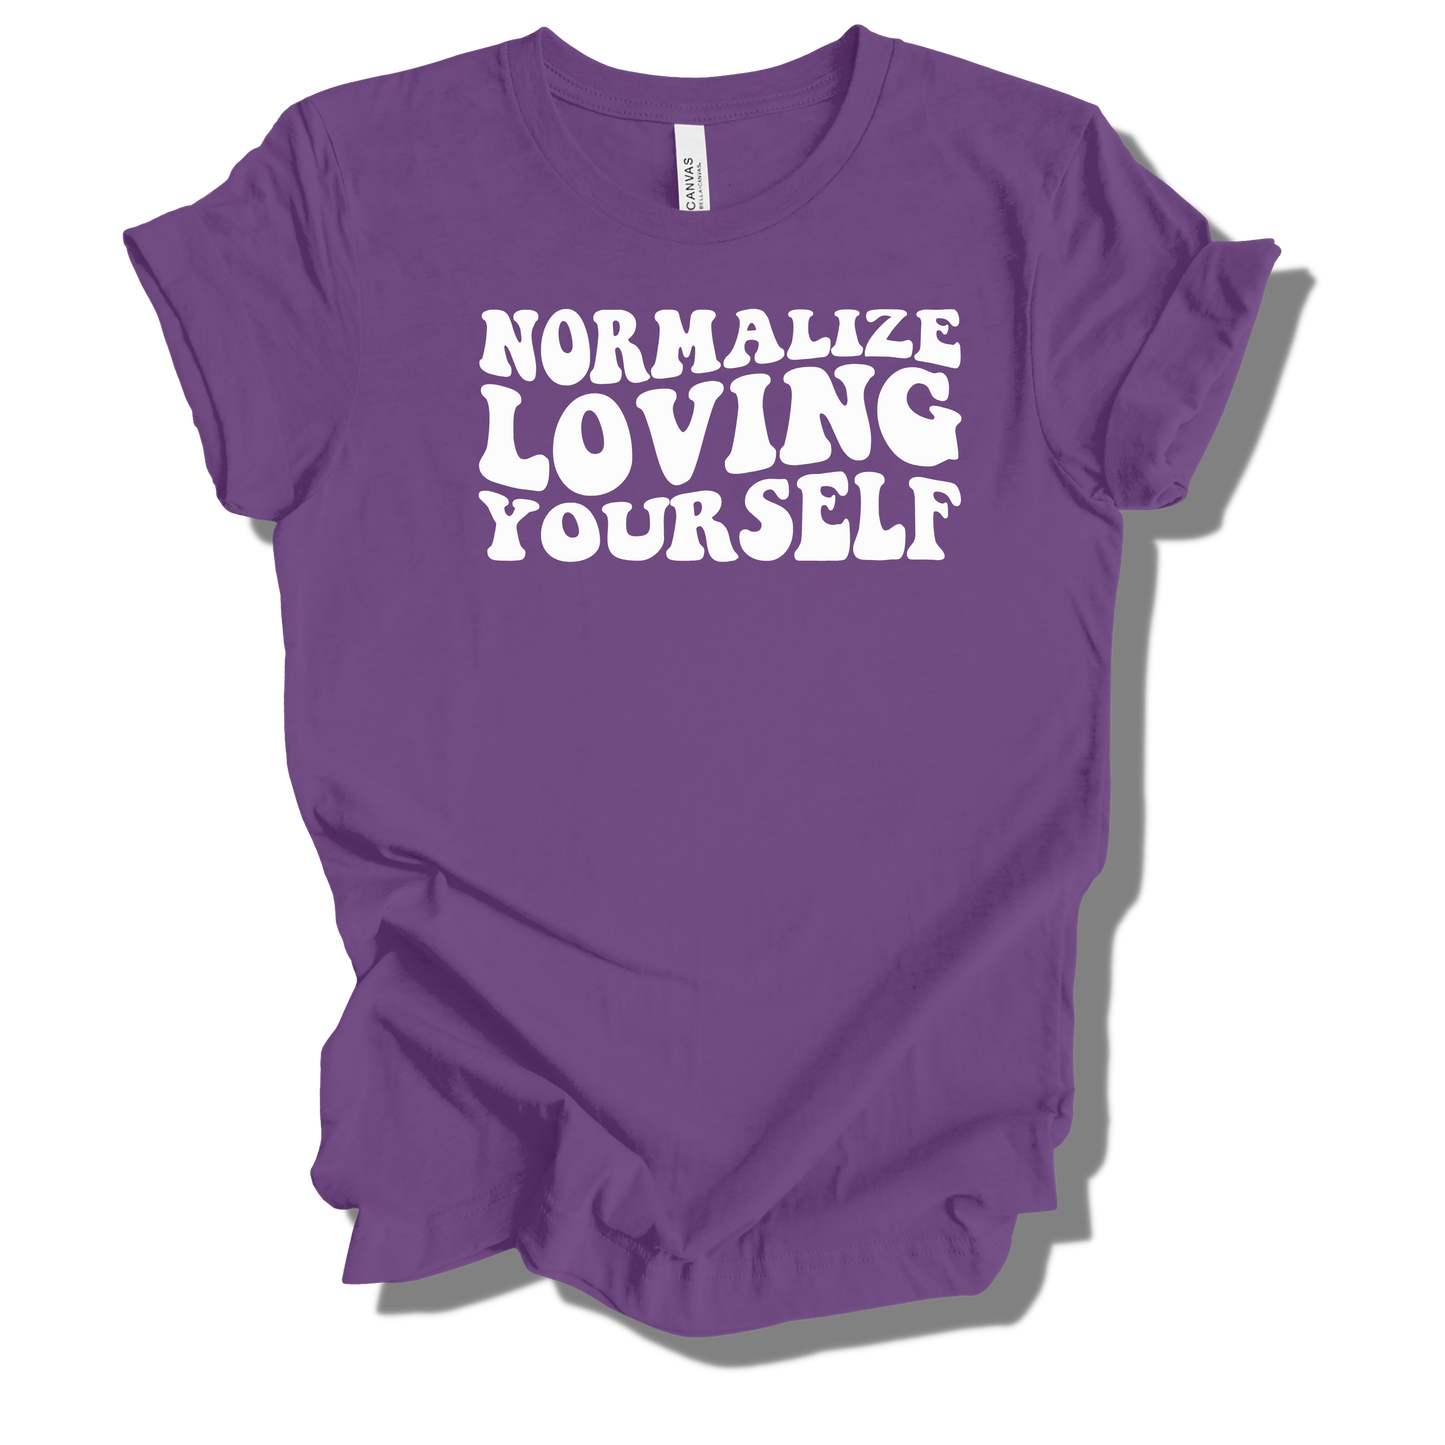 NORMALIZE LOVING YOURSELF T-SHIRT (WHITE WORDING)